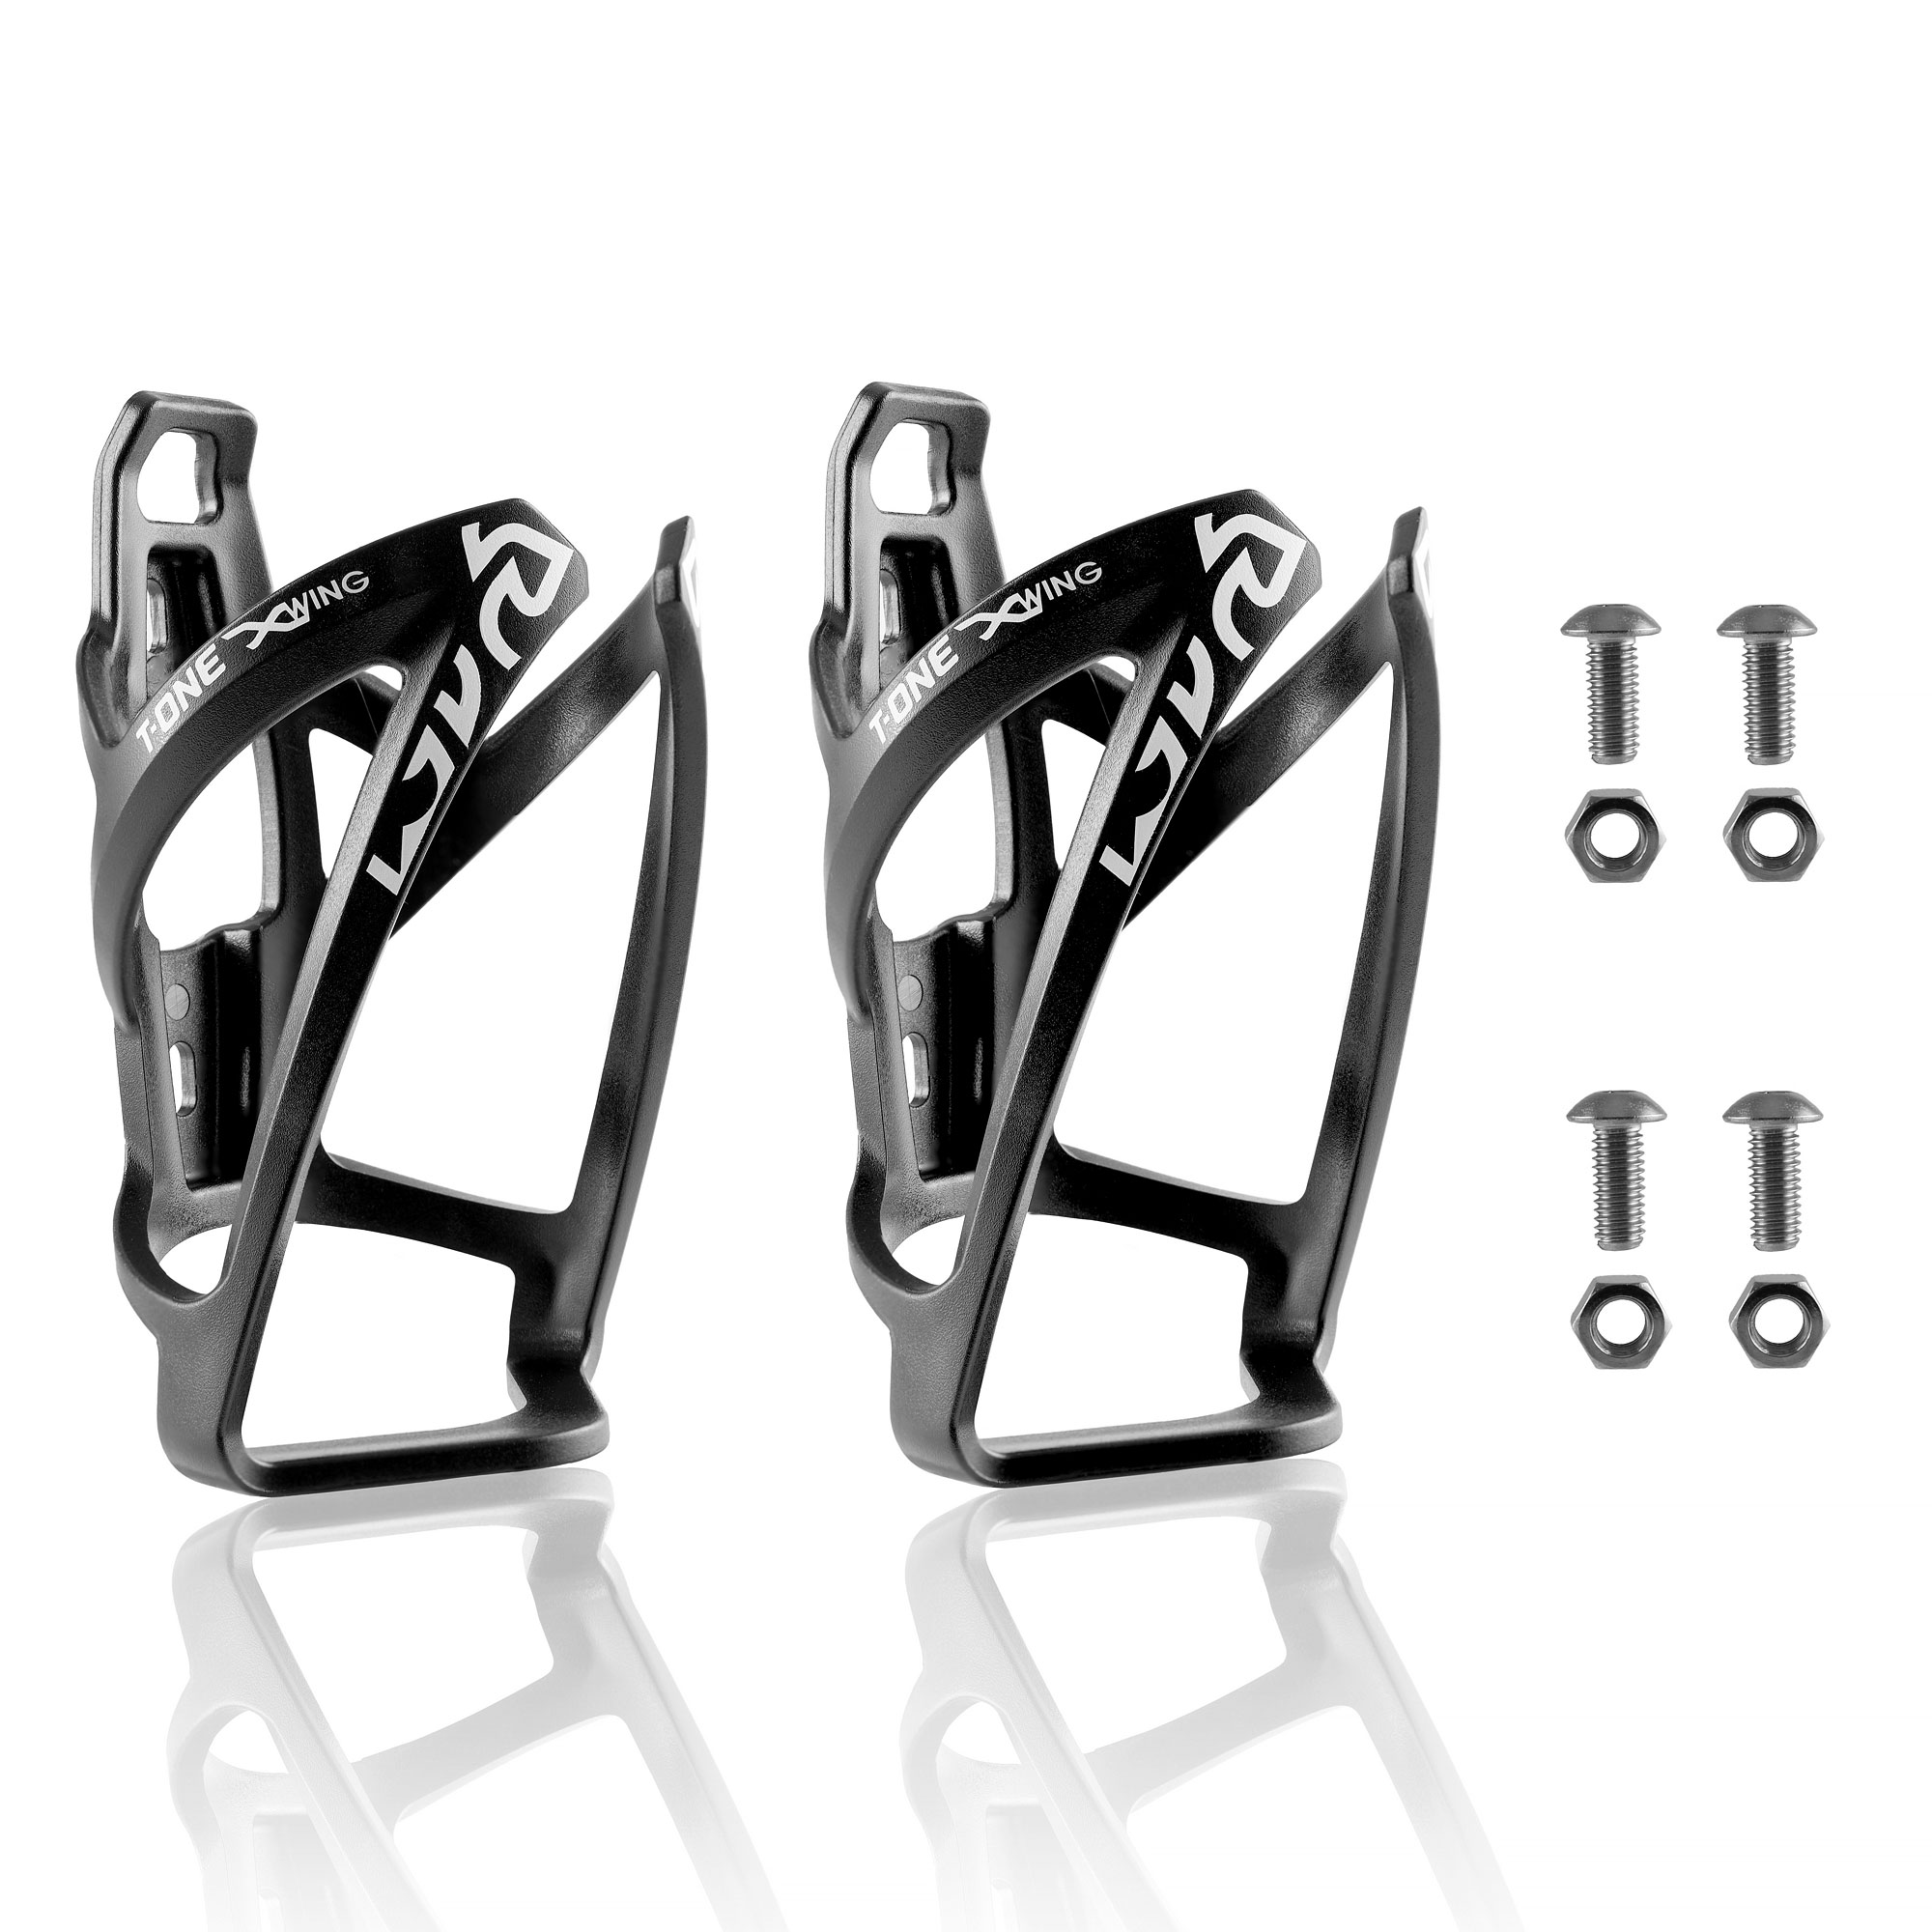 2x T-ONE Bicycle Bike Bottle Holder Cage Black